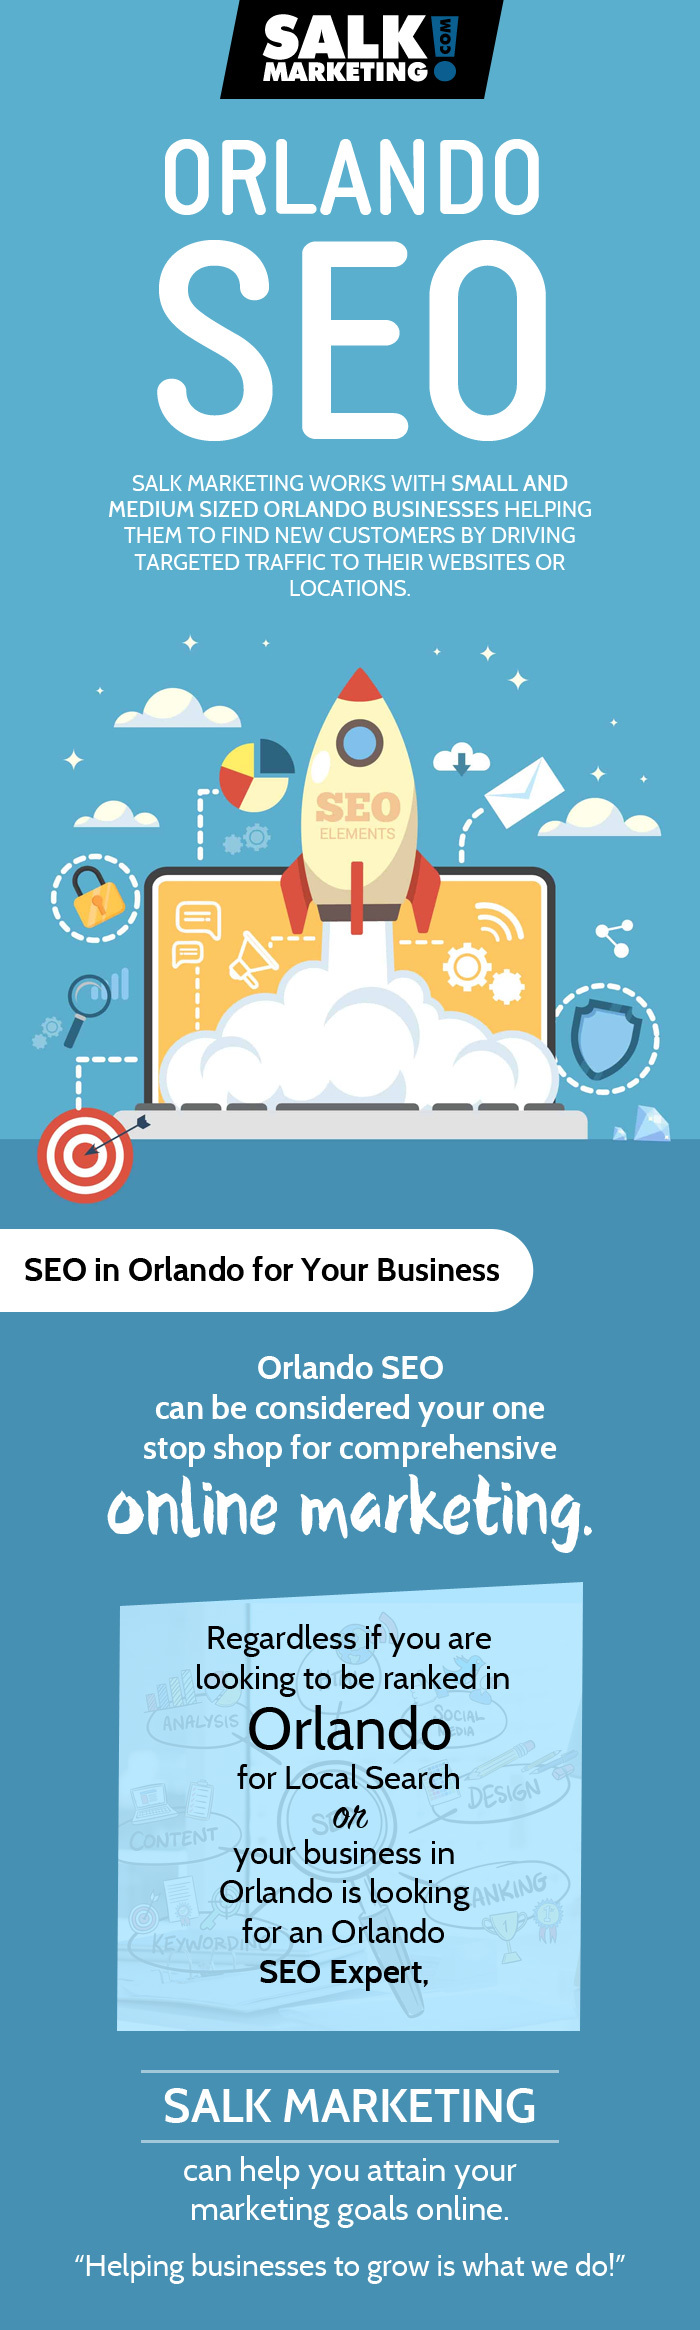 Attain your Marketing Goals with Local SEO Services from Salk Marketing